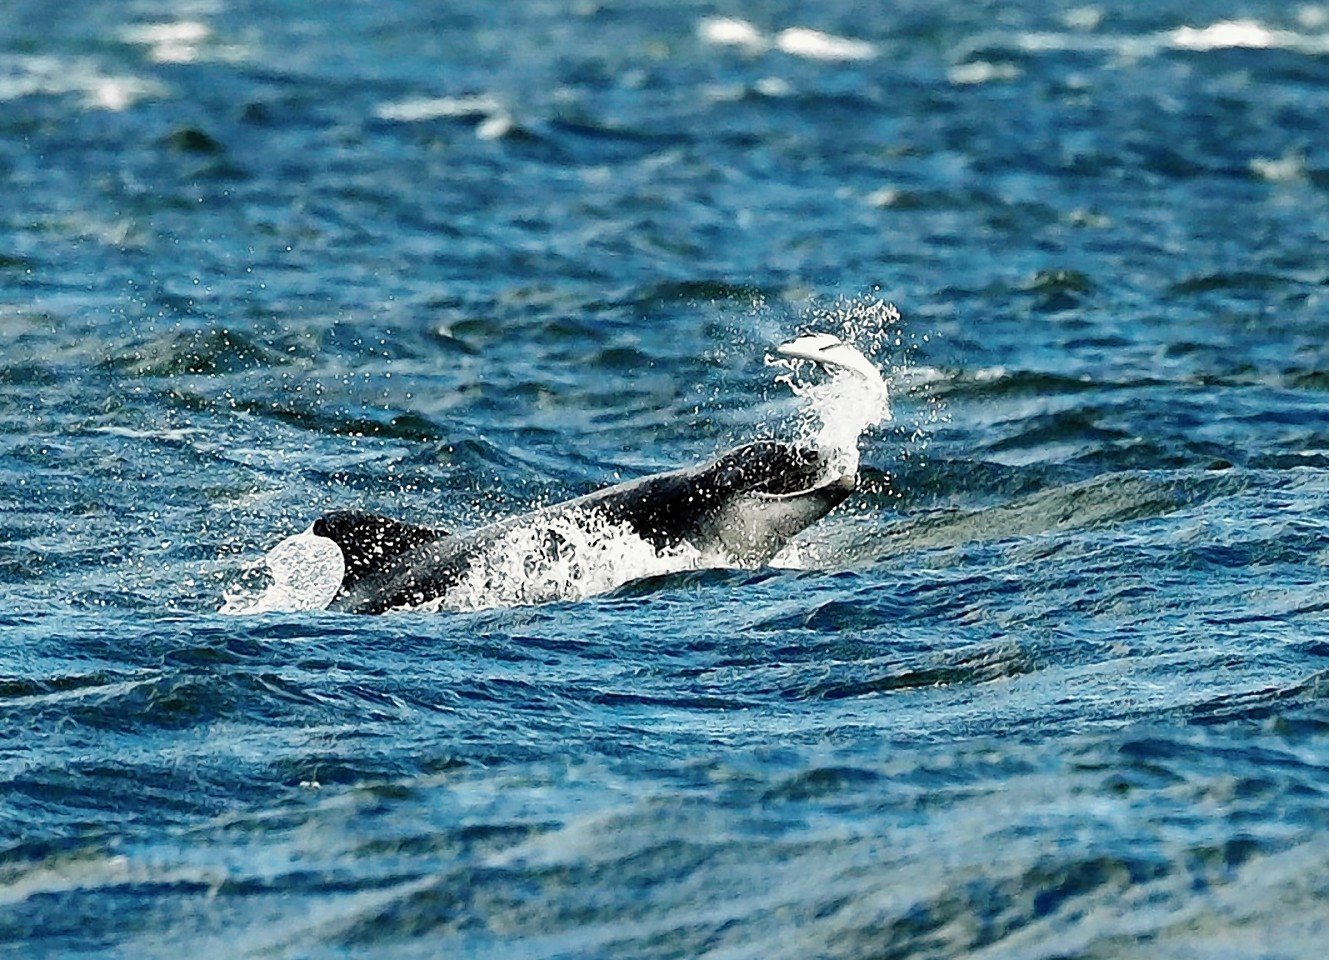 Dolphins living in the north of Scotland have been snapped frolicking in the sea